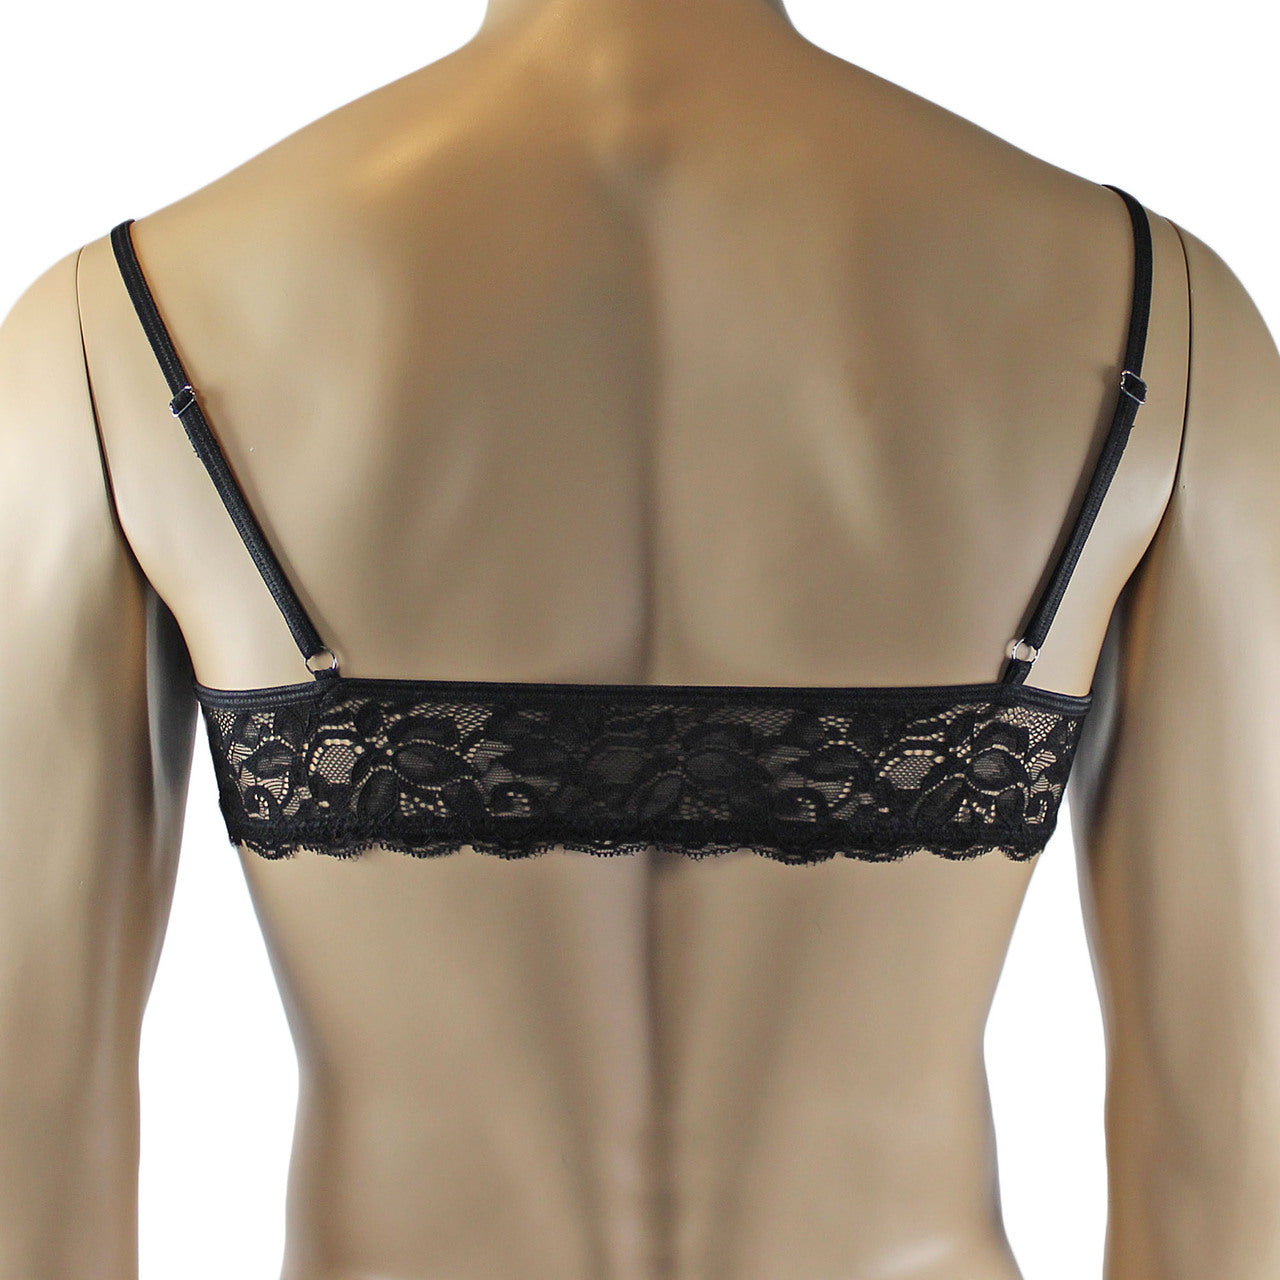 Mens Kristy Lingerie Bra Top in Lace with thin Straps Black